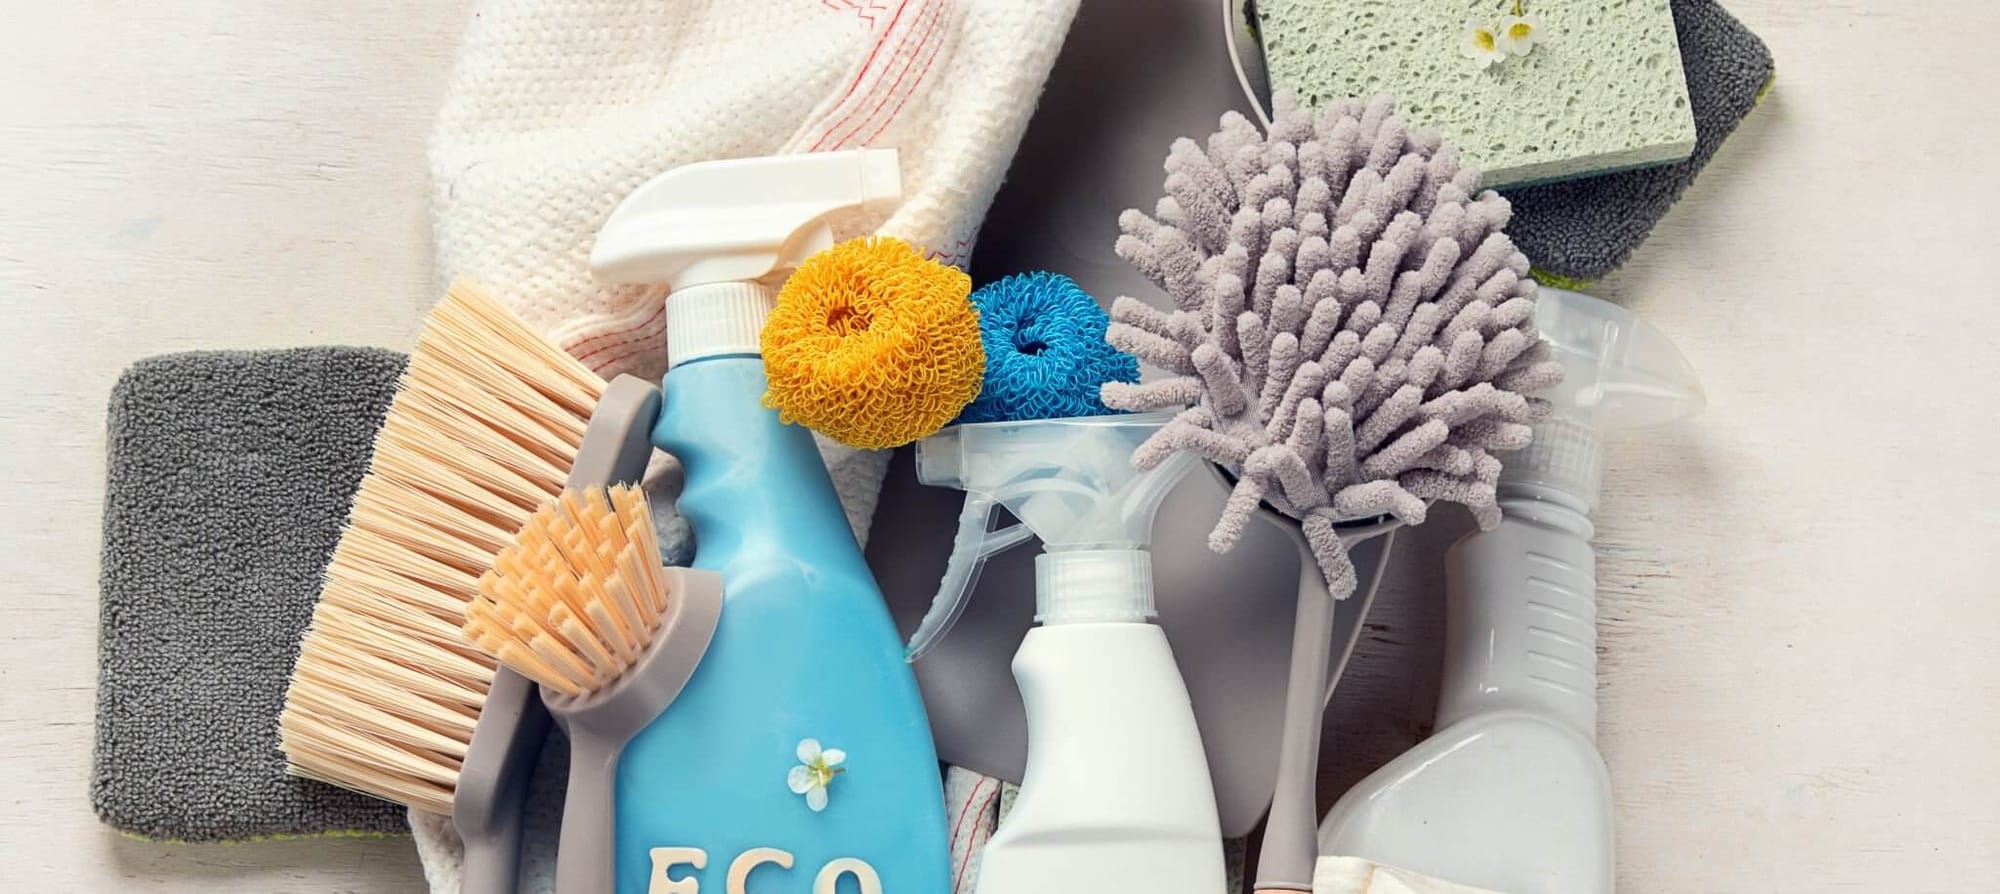 eco-cleaning supplies